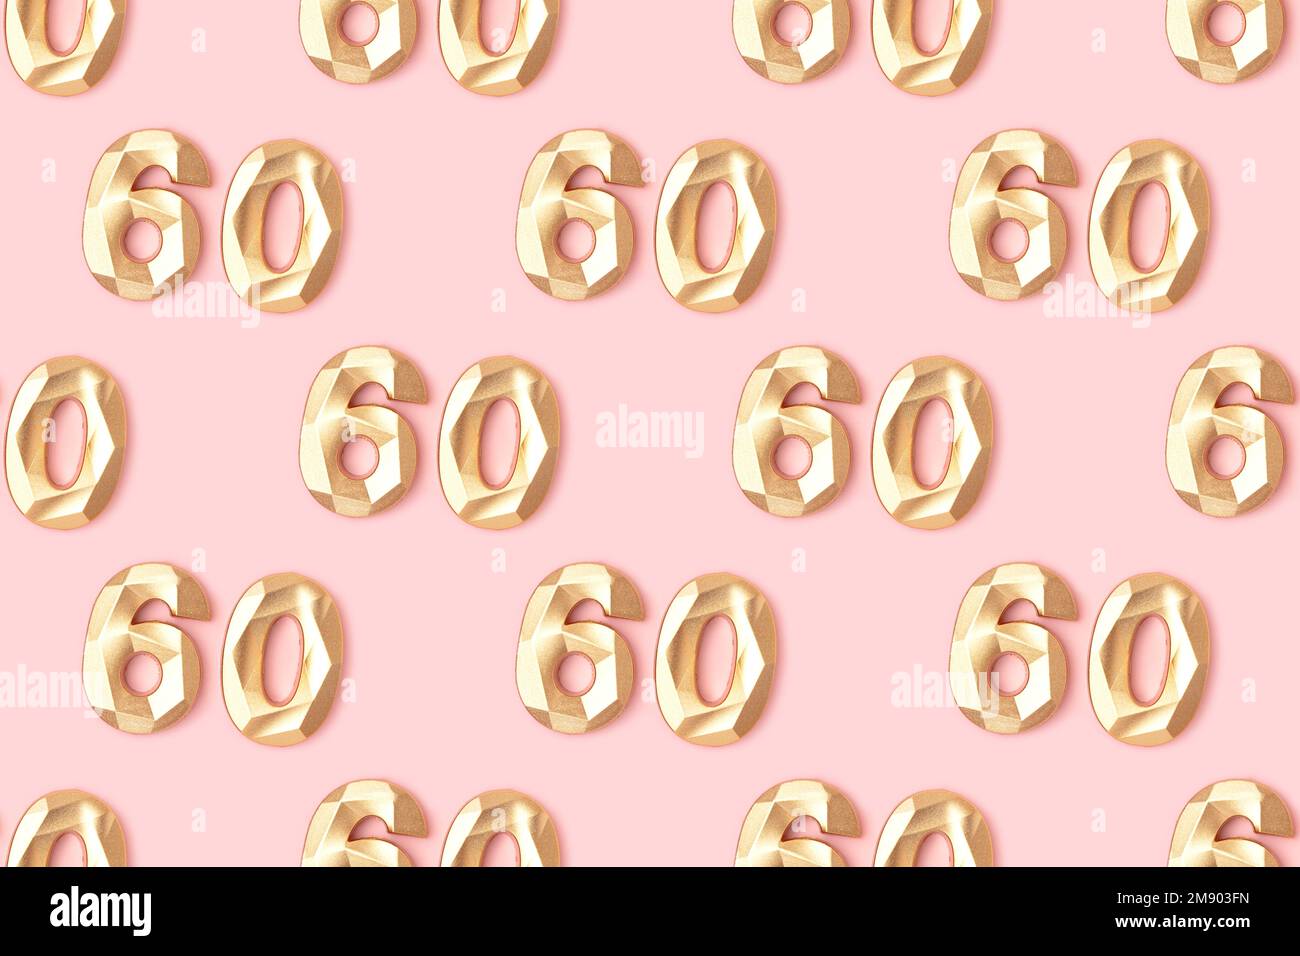 Pattern made of gold colored number sixty on a pink pastel background. Stock Photo